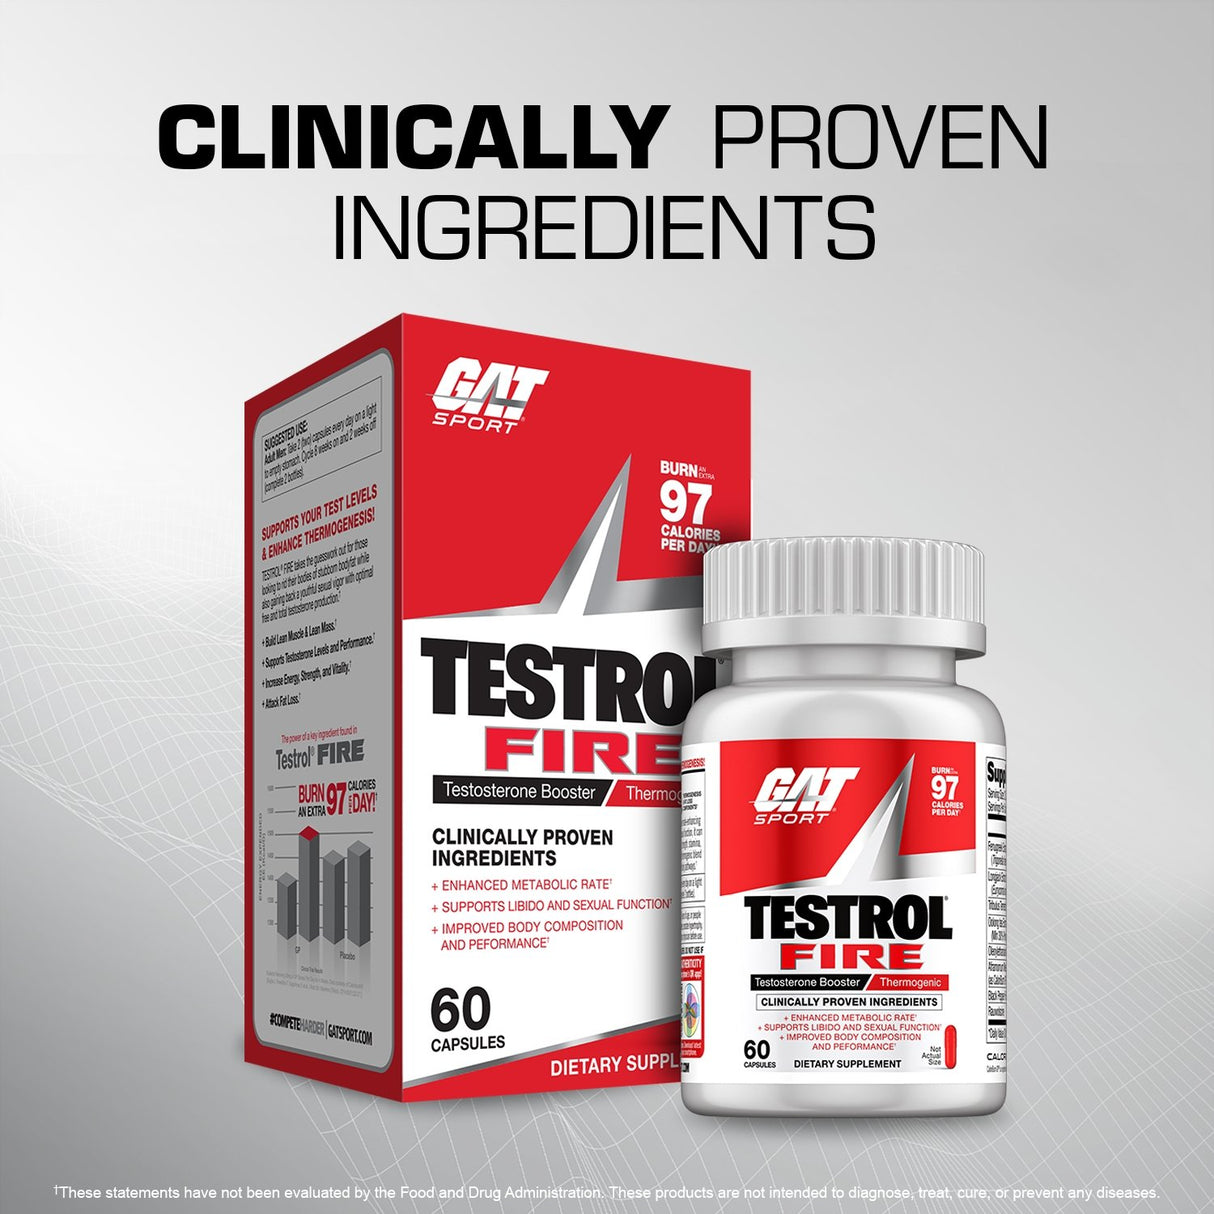 GAT infuses its original test booster with fat loss for Testrol Fire